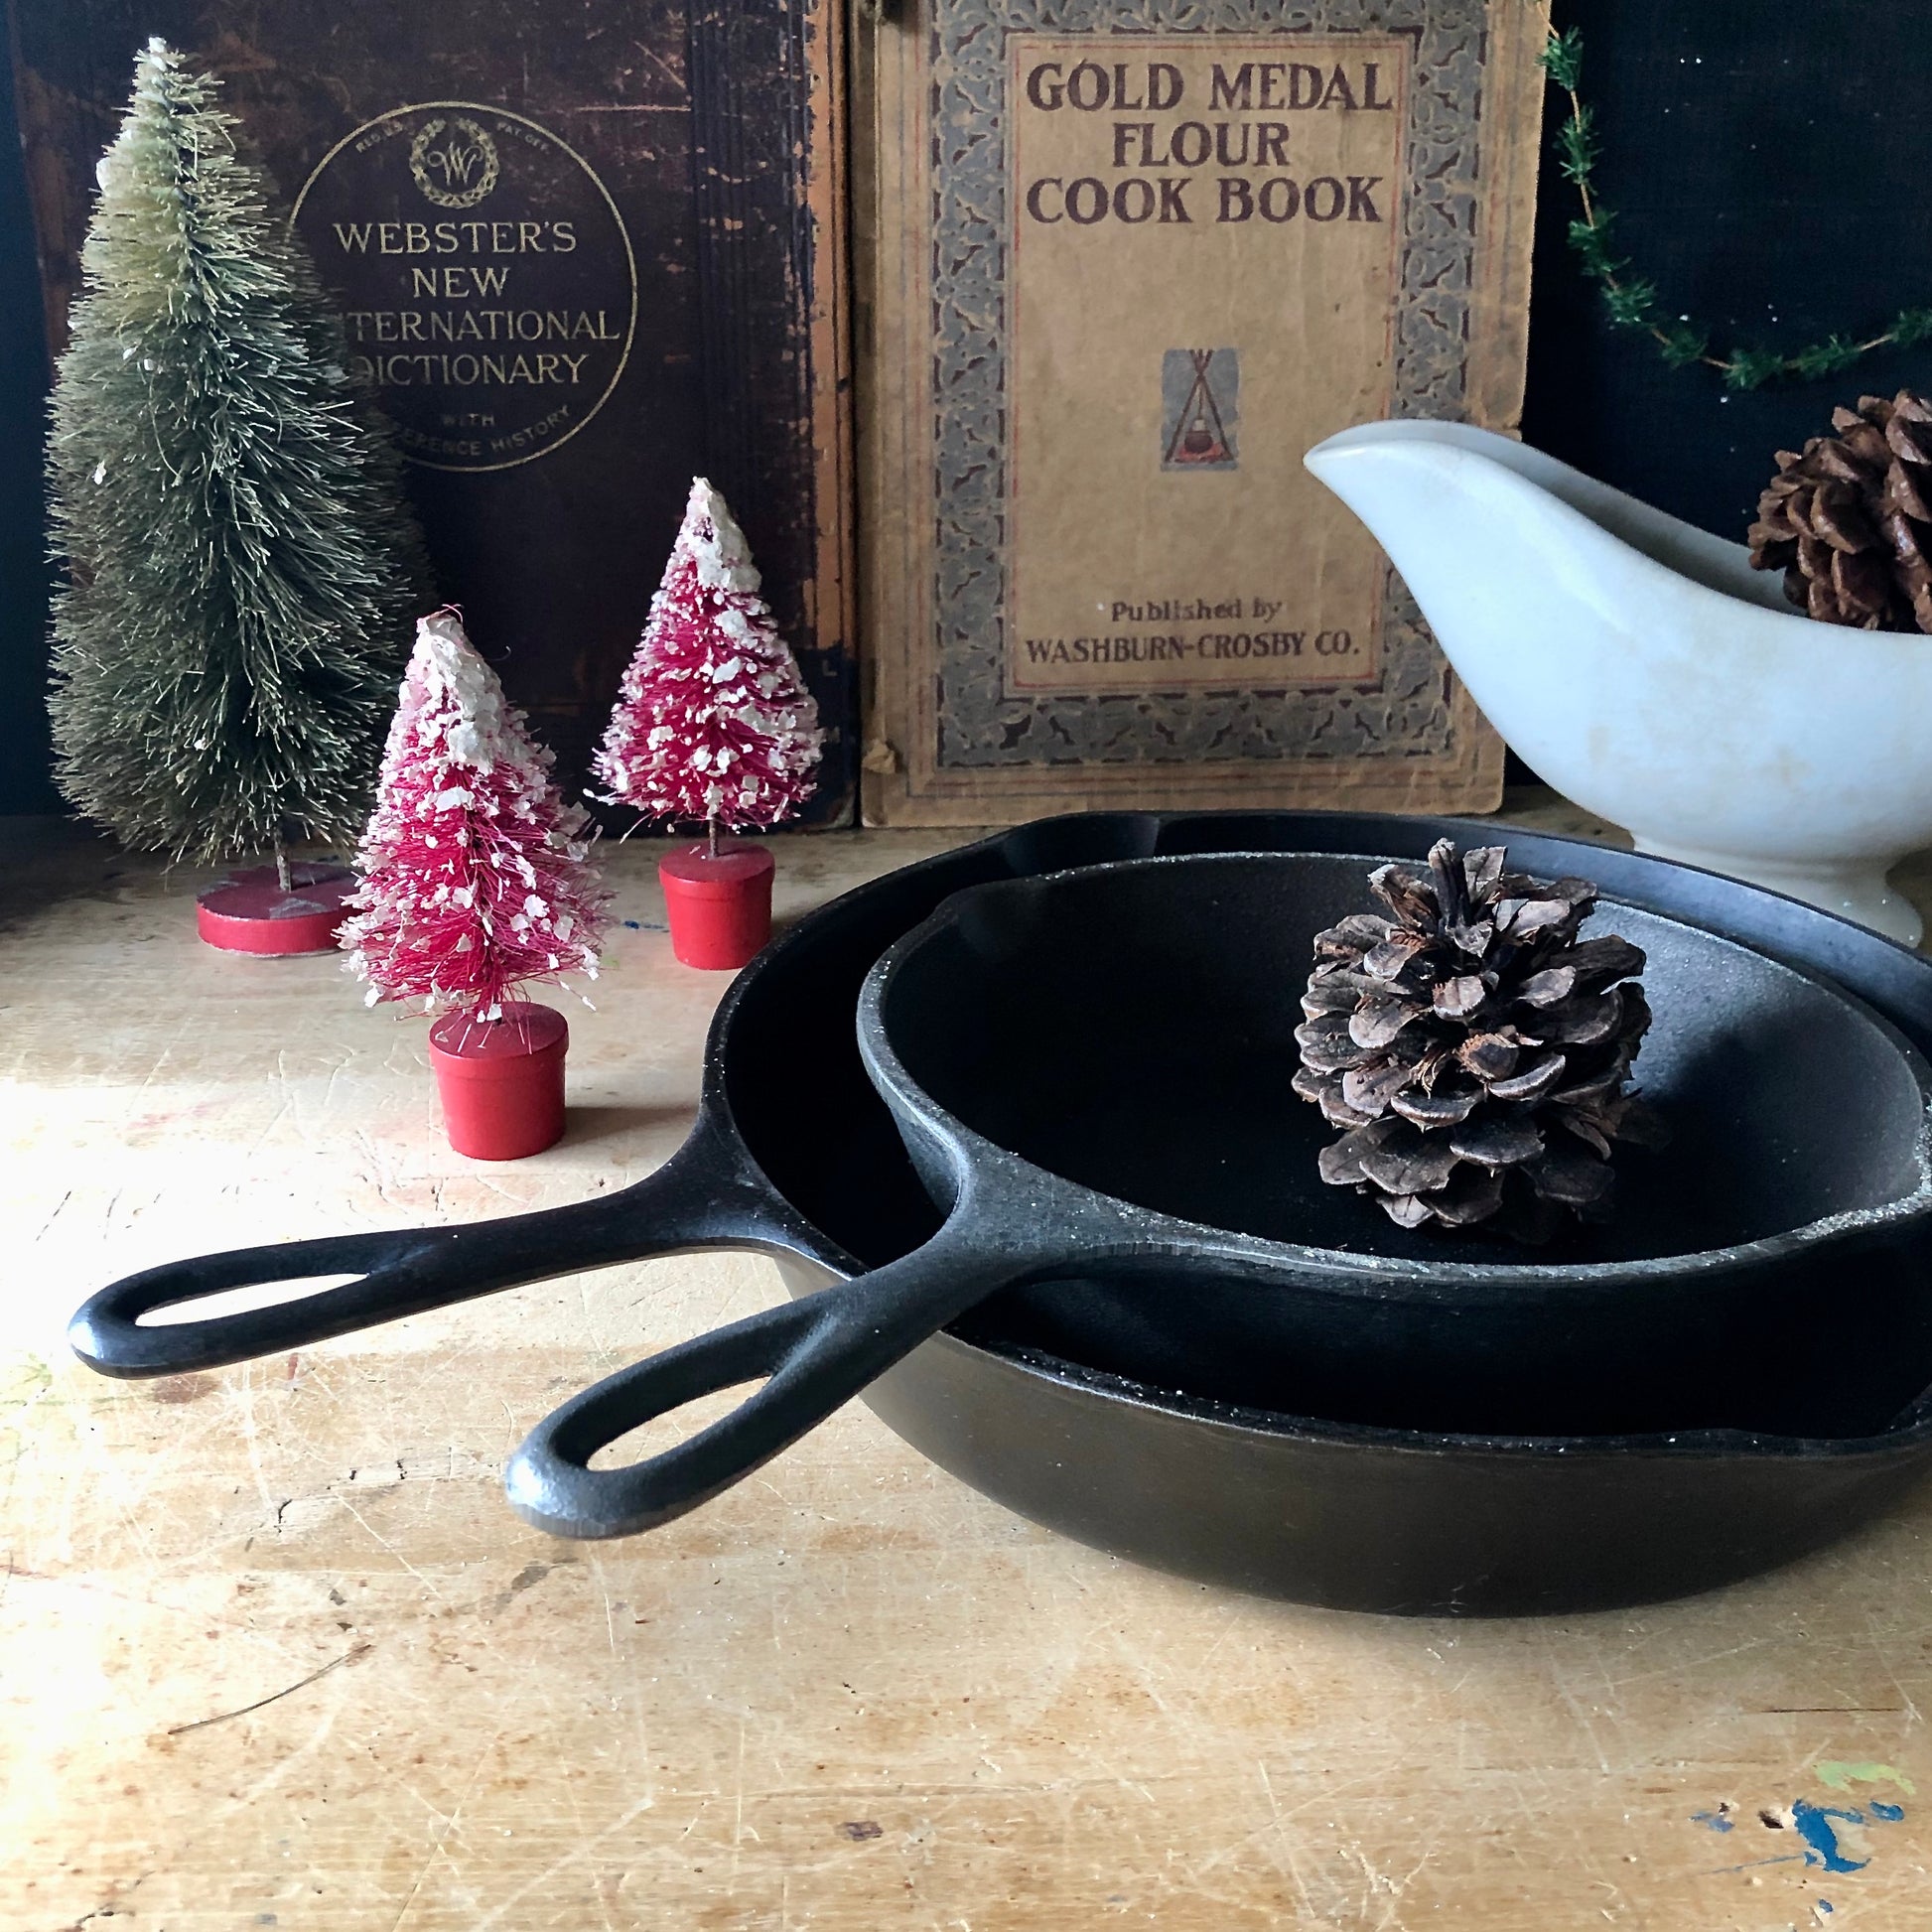 Lodge Cast Iron - Share your favorite piece of vintage